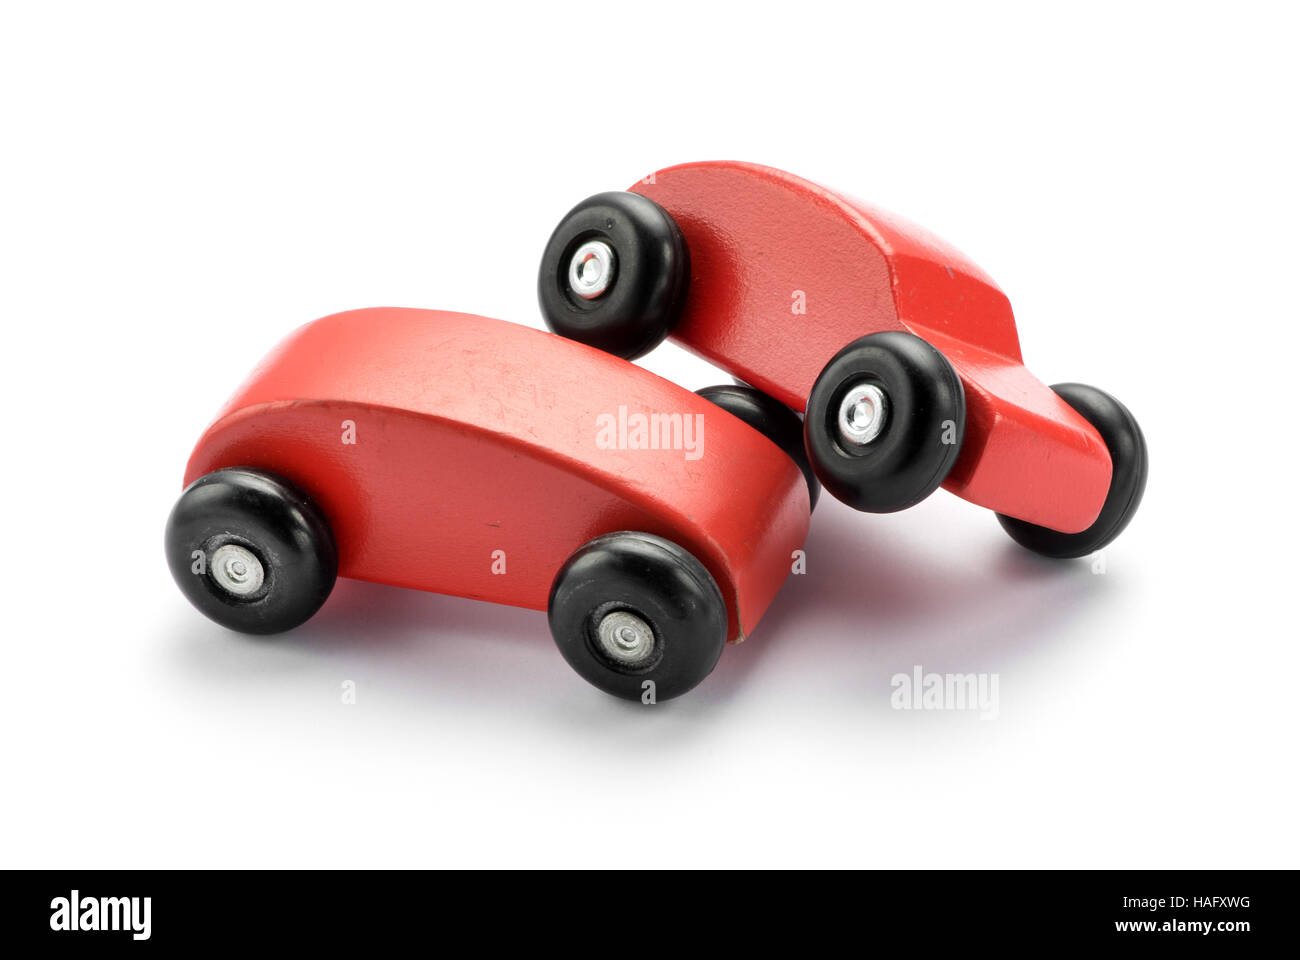 Two stylized toy wooden red cars pile on one another conceptual of a motor vehicle accident or collision, on white with copy space Stock Photo